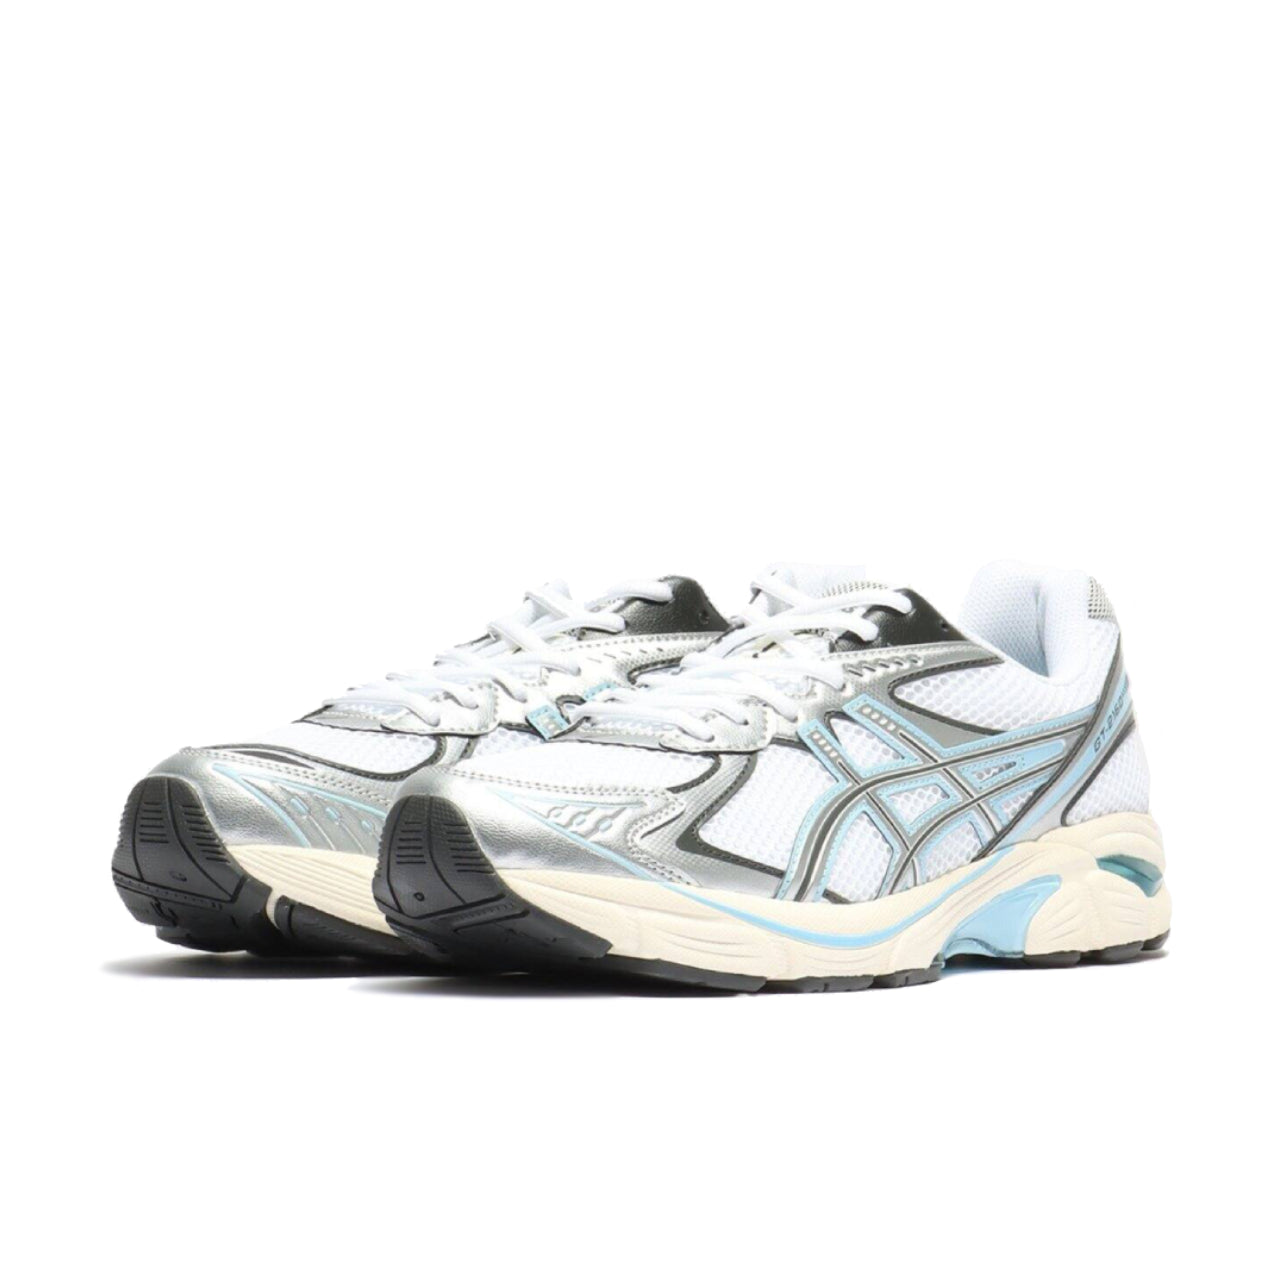 ASICS GT-2160 White Pure Silver - 1203A544-101 - Medial